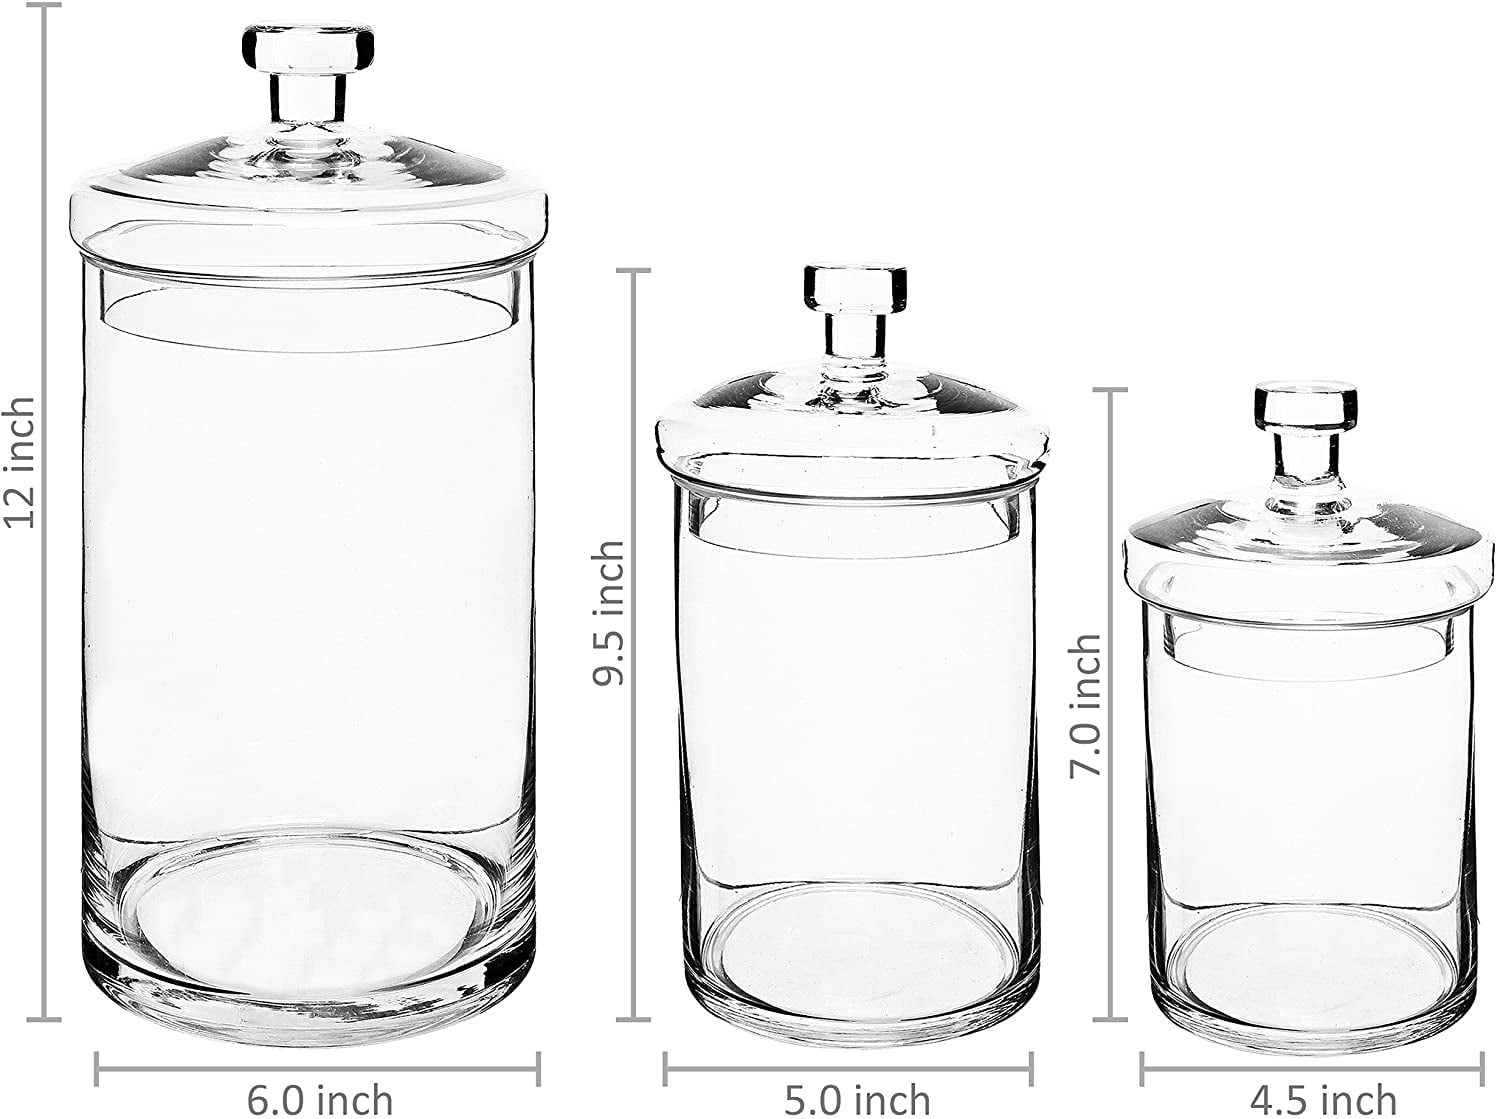 GADGETWIZ Glass Cookie Jar - Glass Apothecary Jars with Lids - Canister Sets for Kitchen Counter - Glass Candy Jars - Glass Canisters Set of 3 